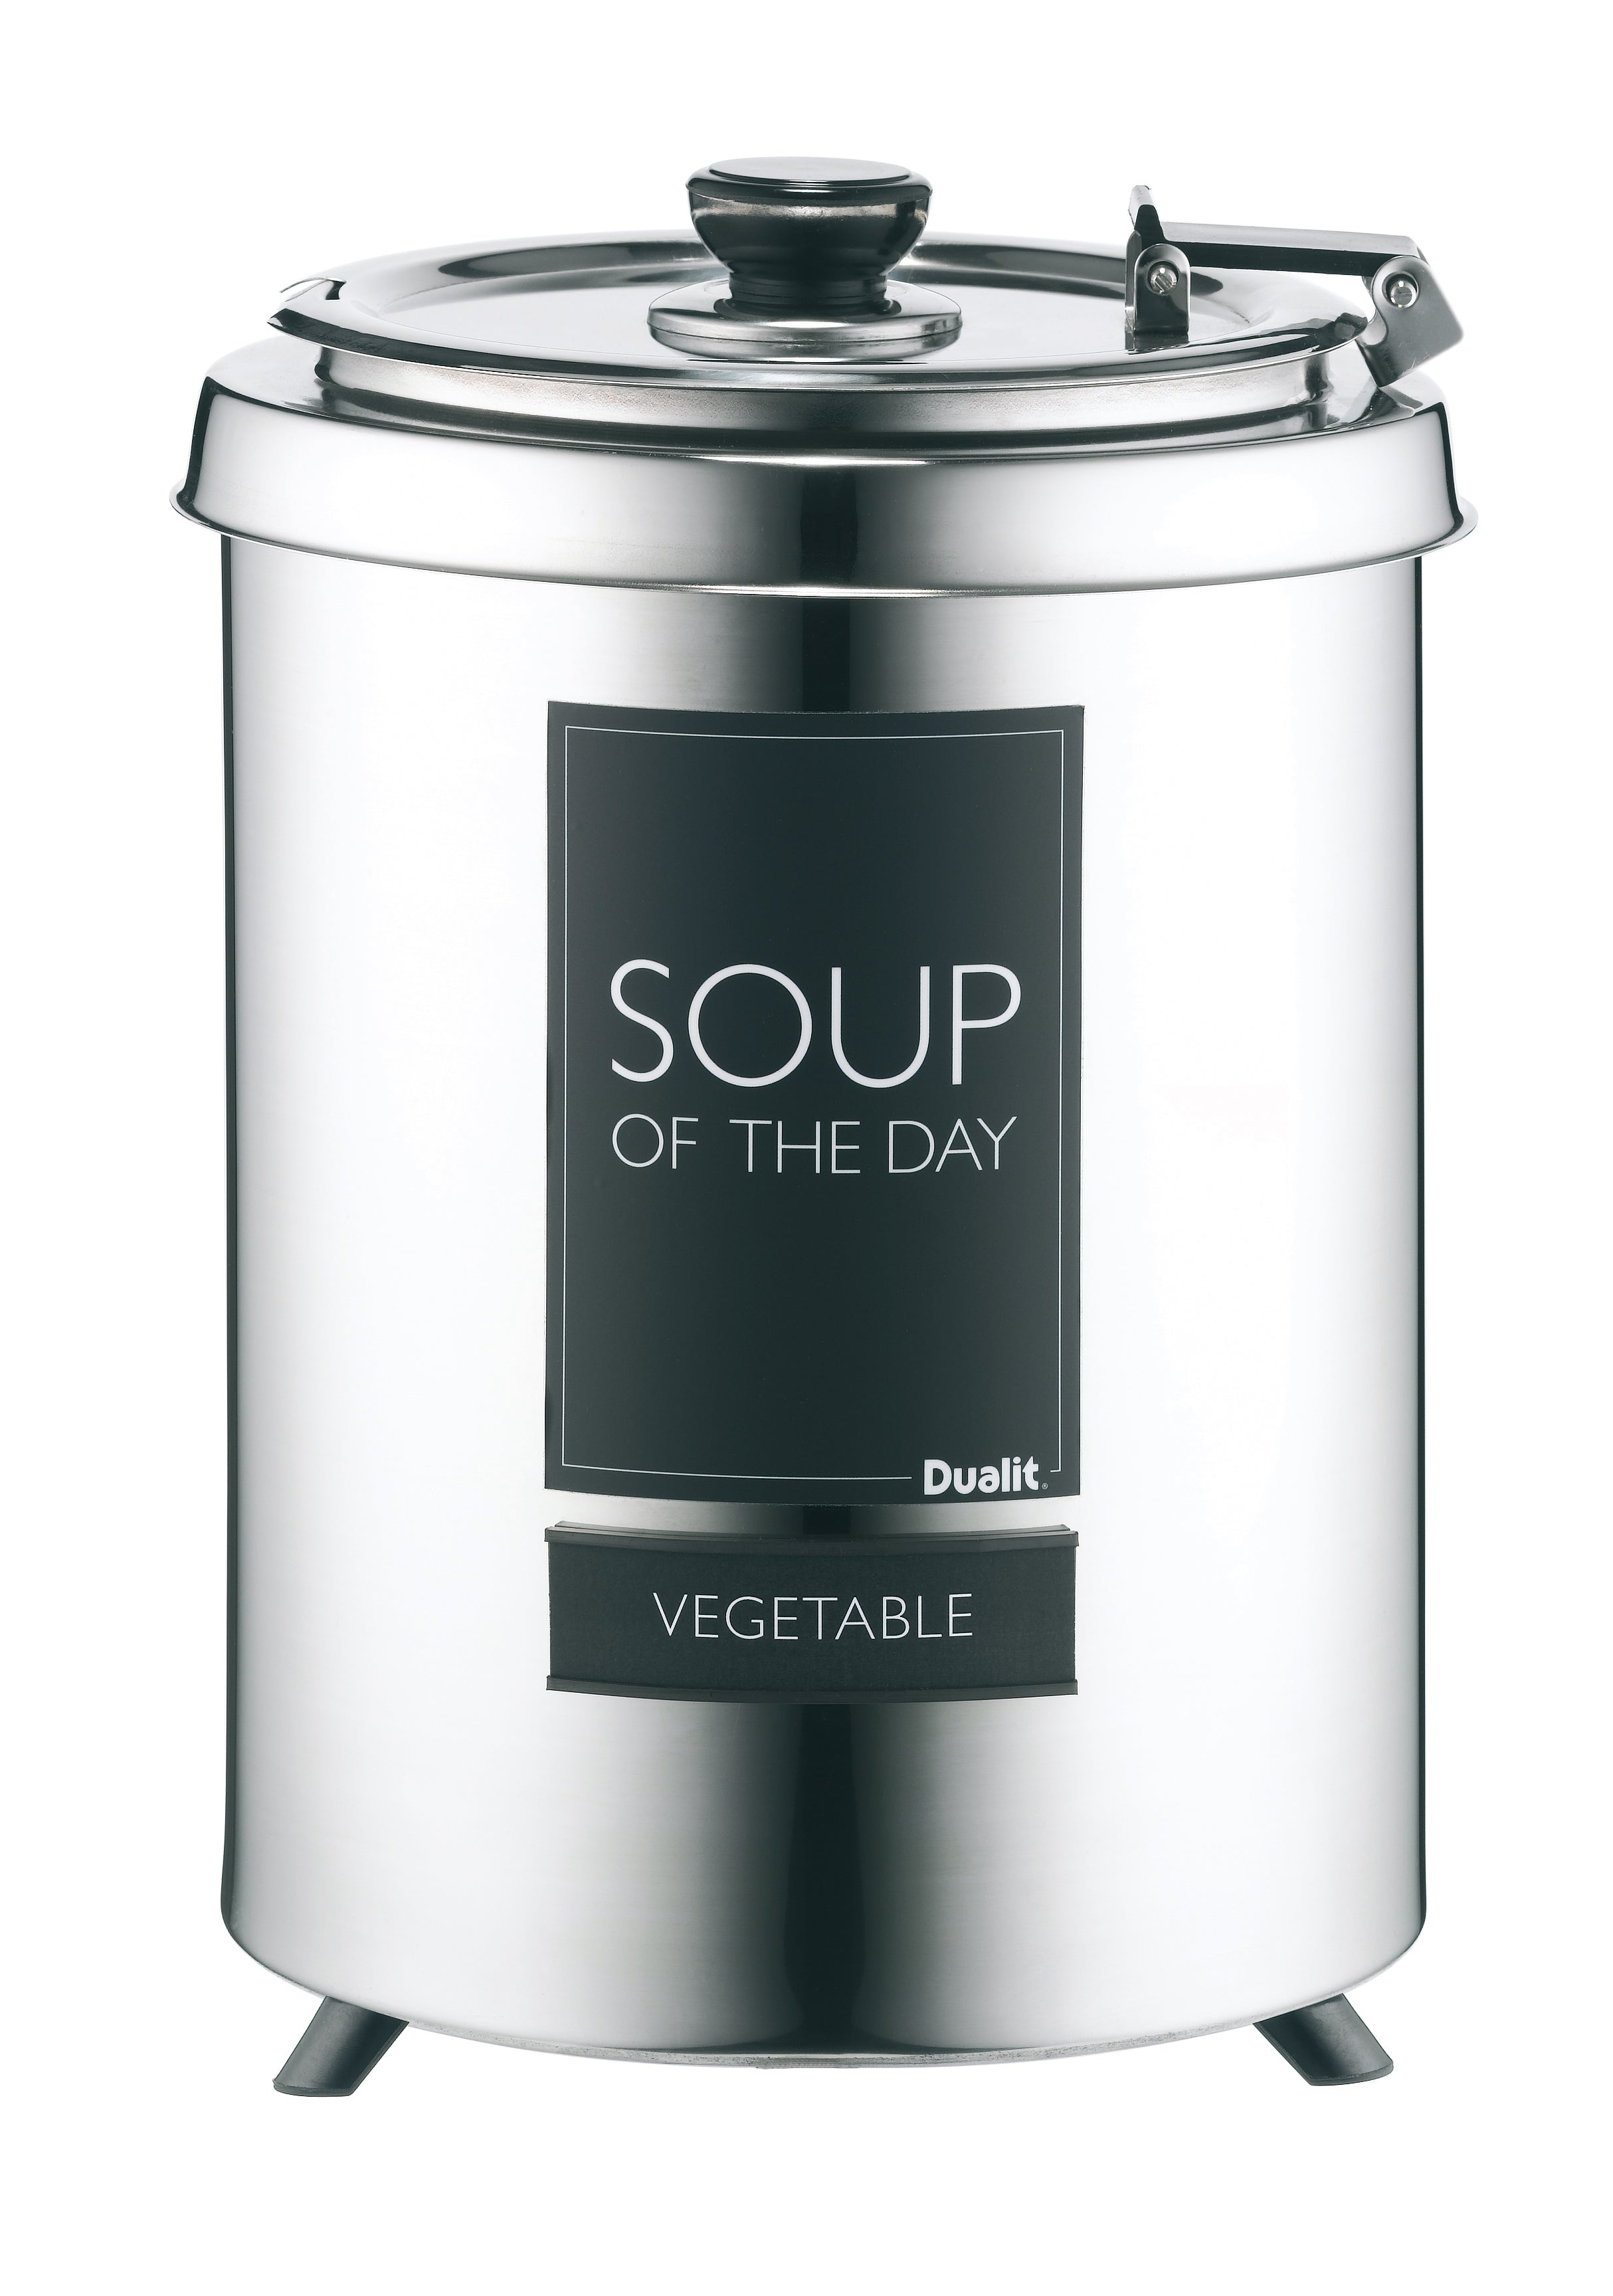 Dualit is dish of the day with the new 6L Soup kettle